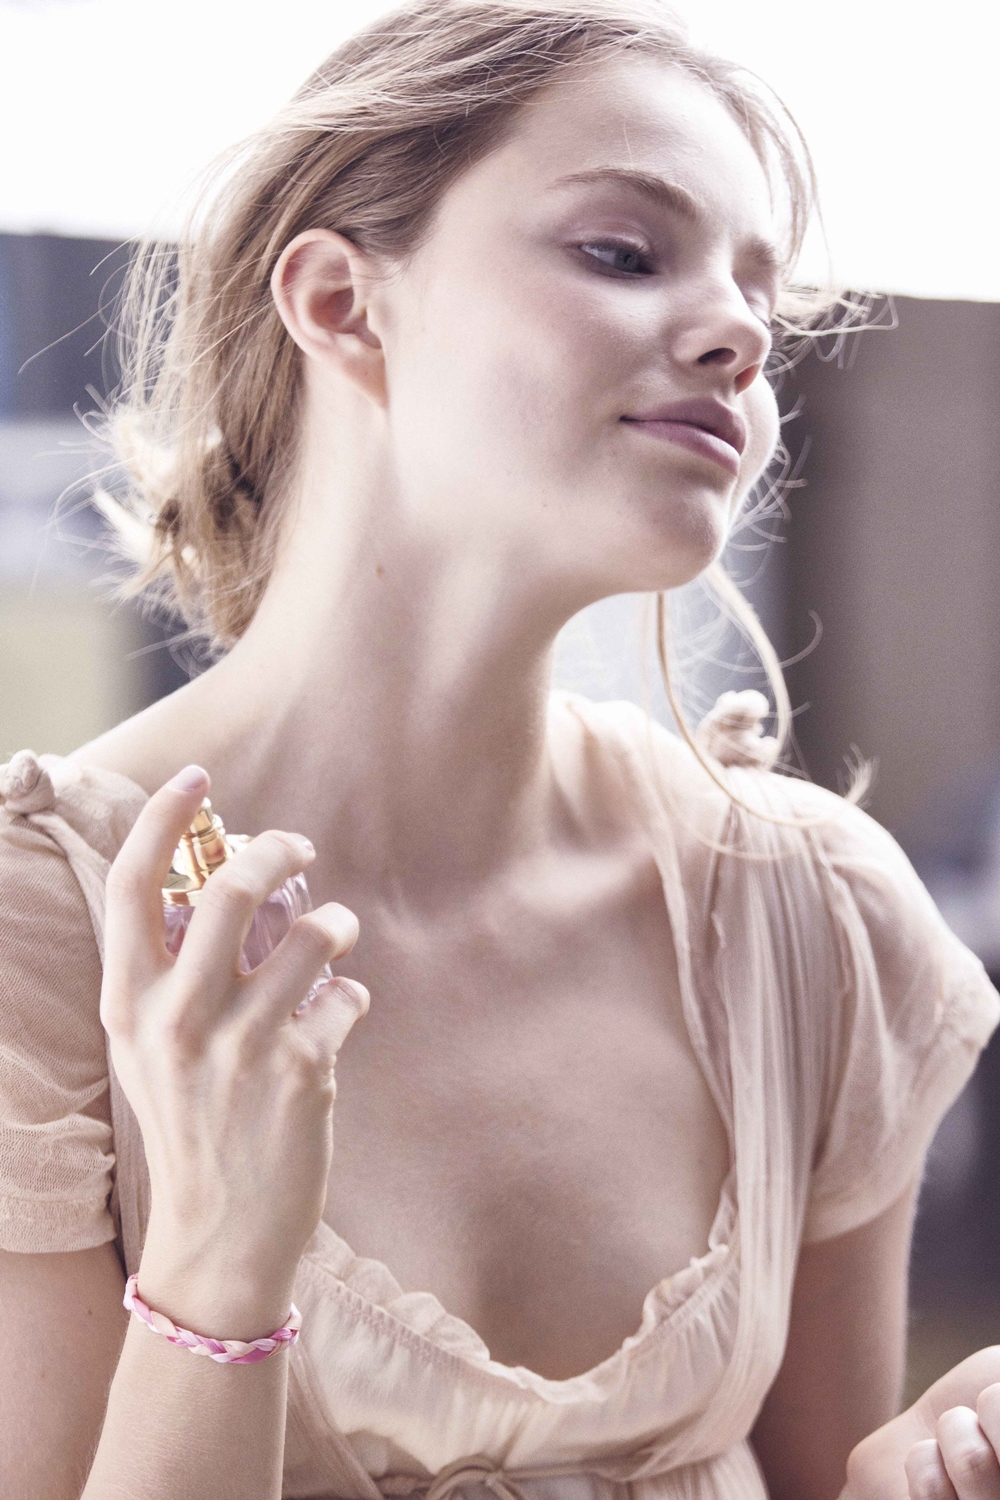 Flora Chic Behind the Scenes image - woman spraying fragrance on her neck